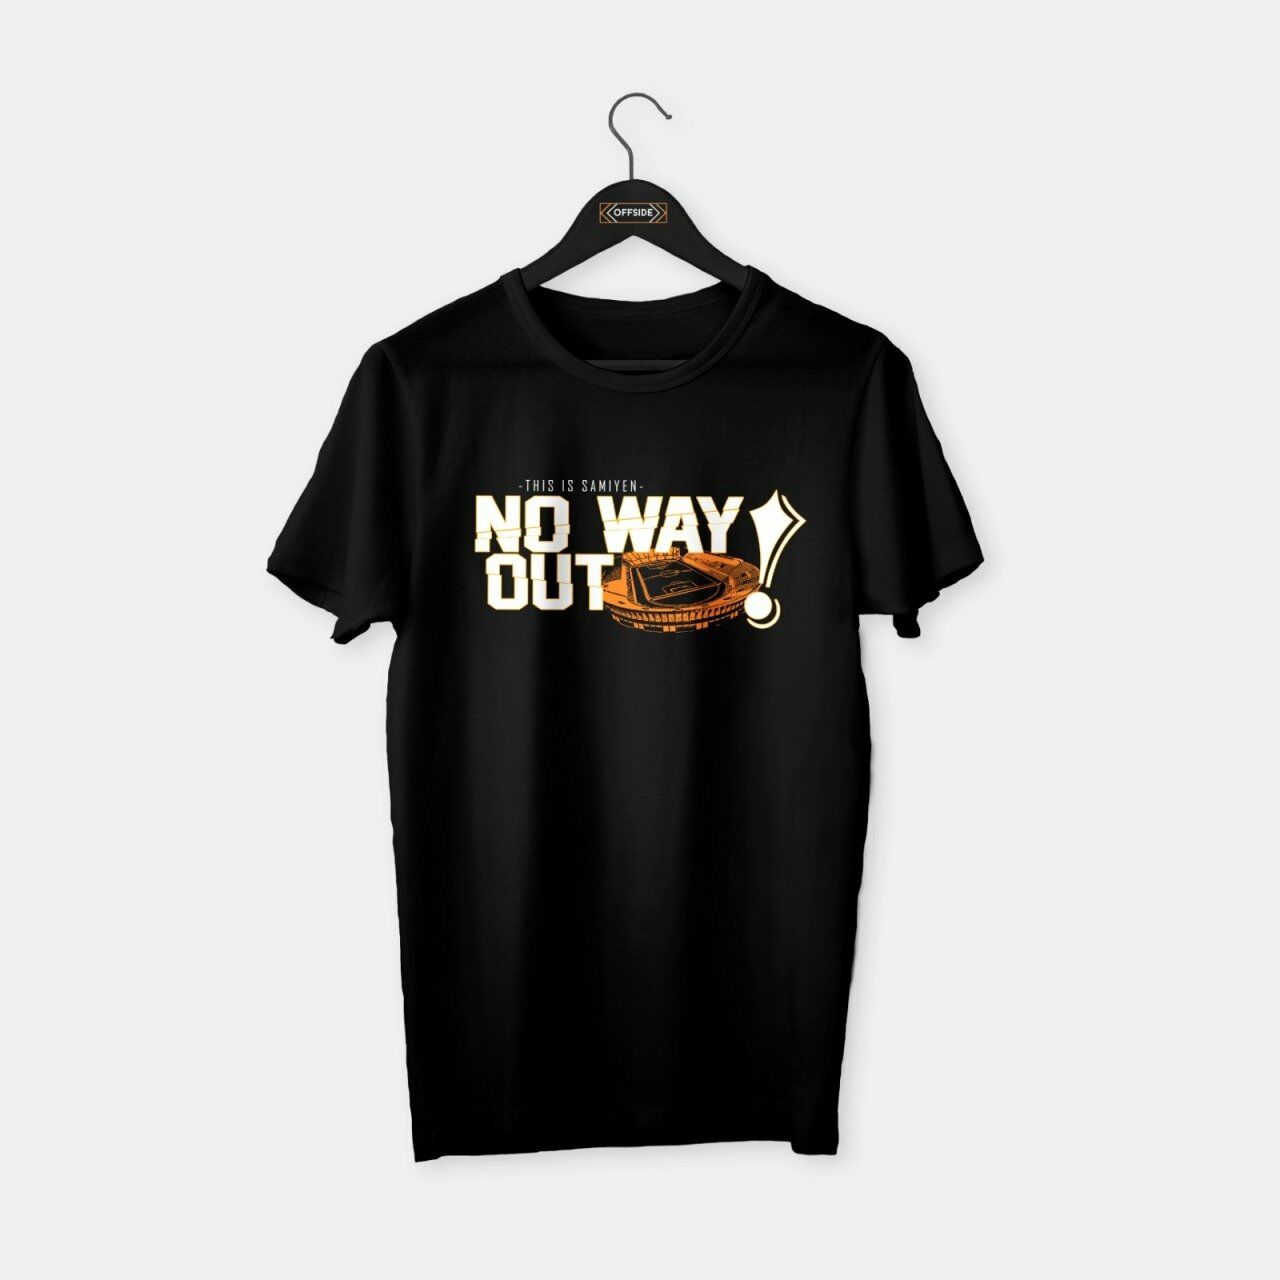 This is Sami Yen - No Way Out! T-shirt